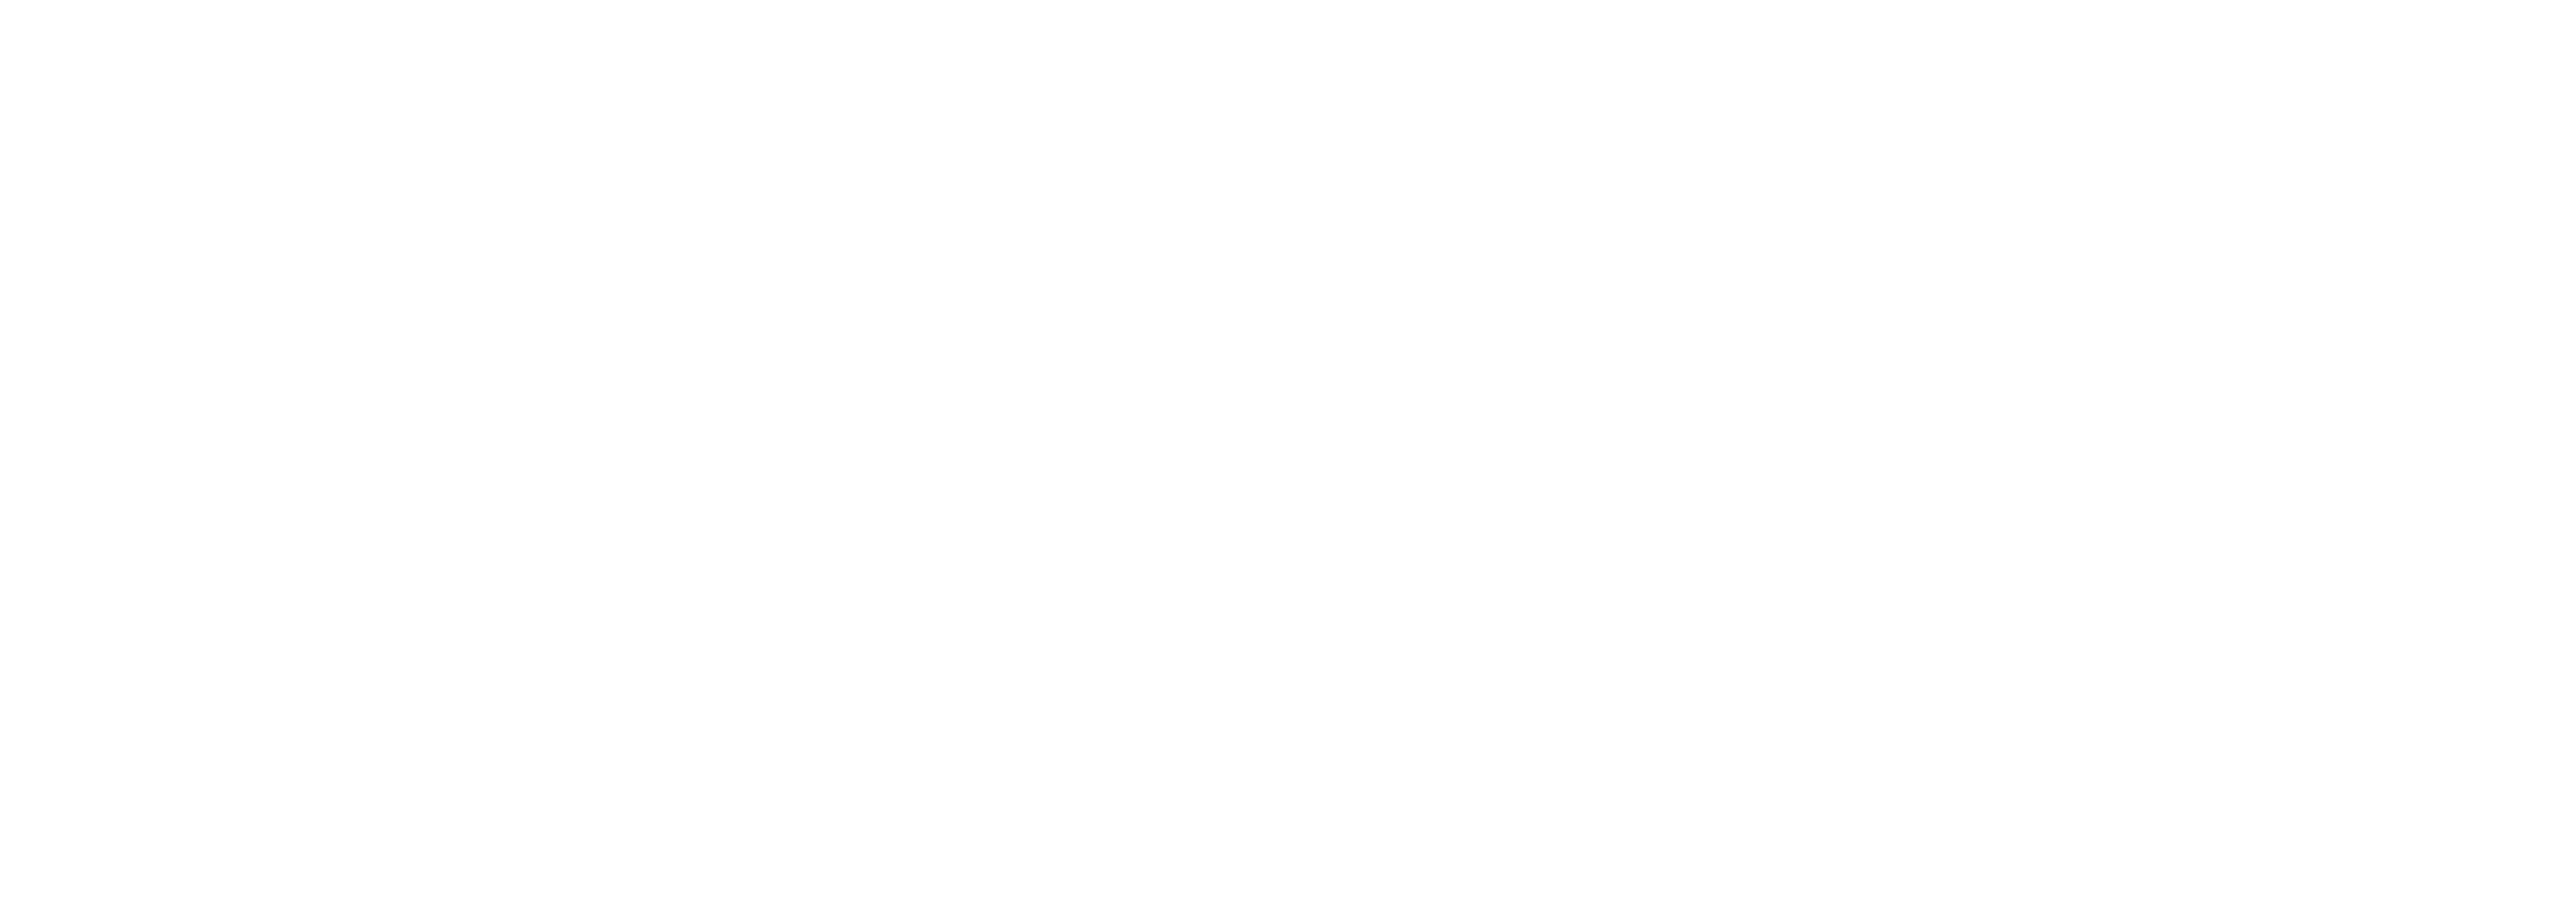 SizzleUp Logo in weiss